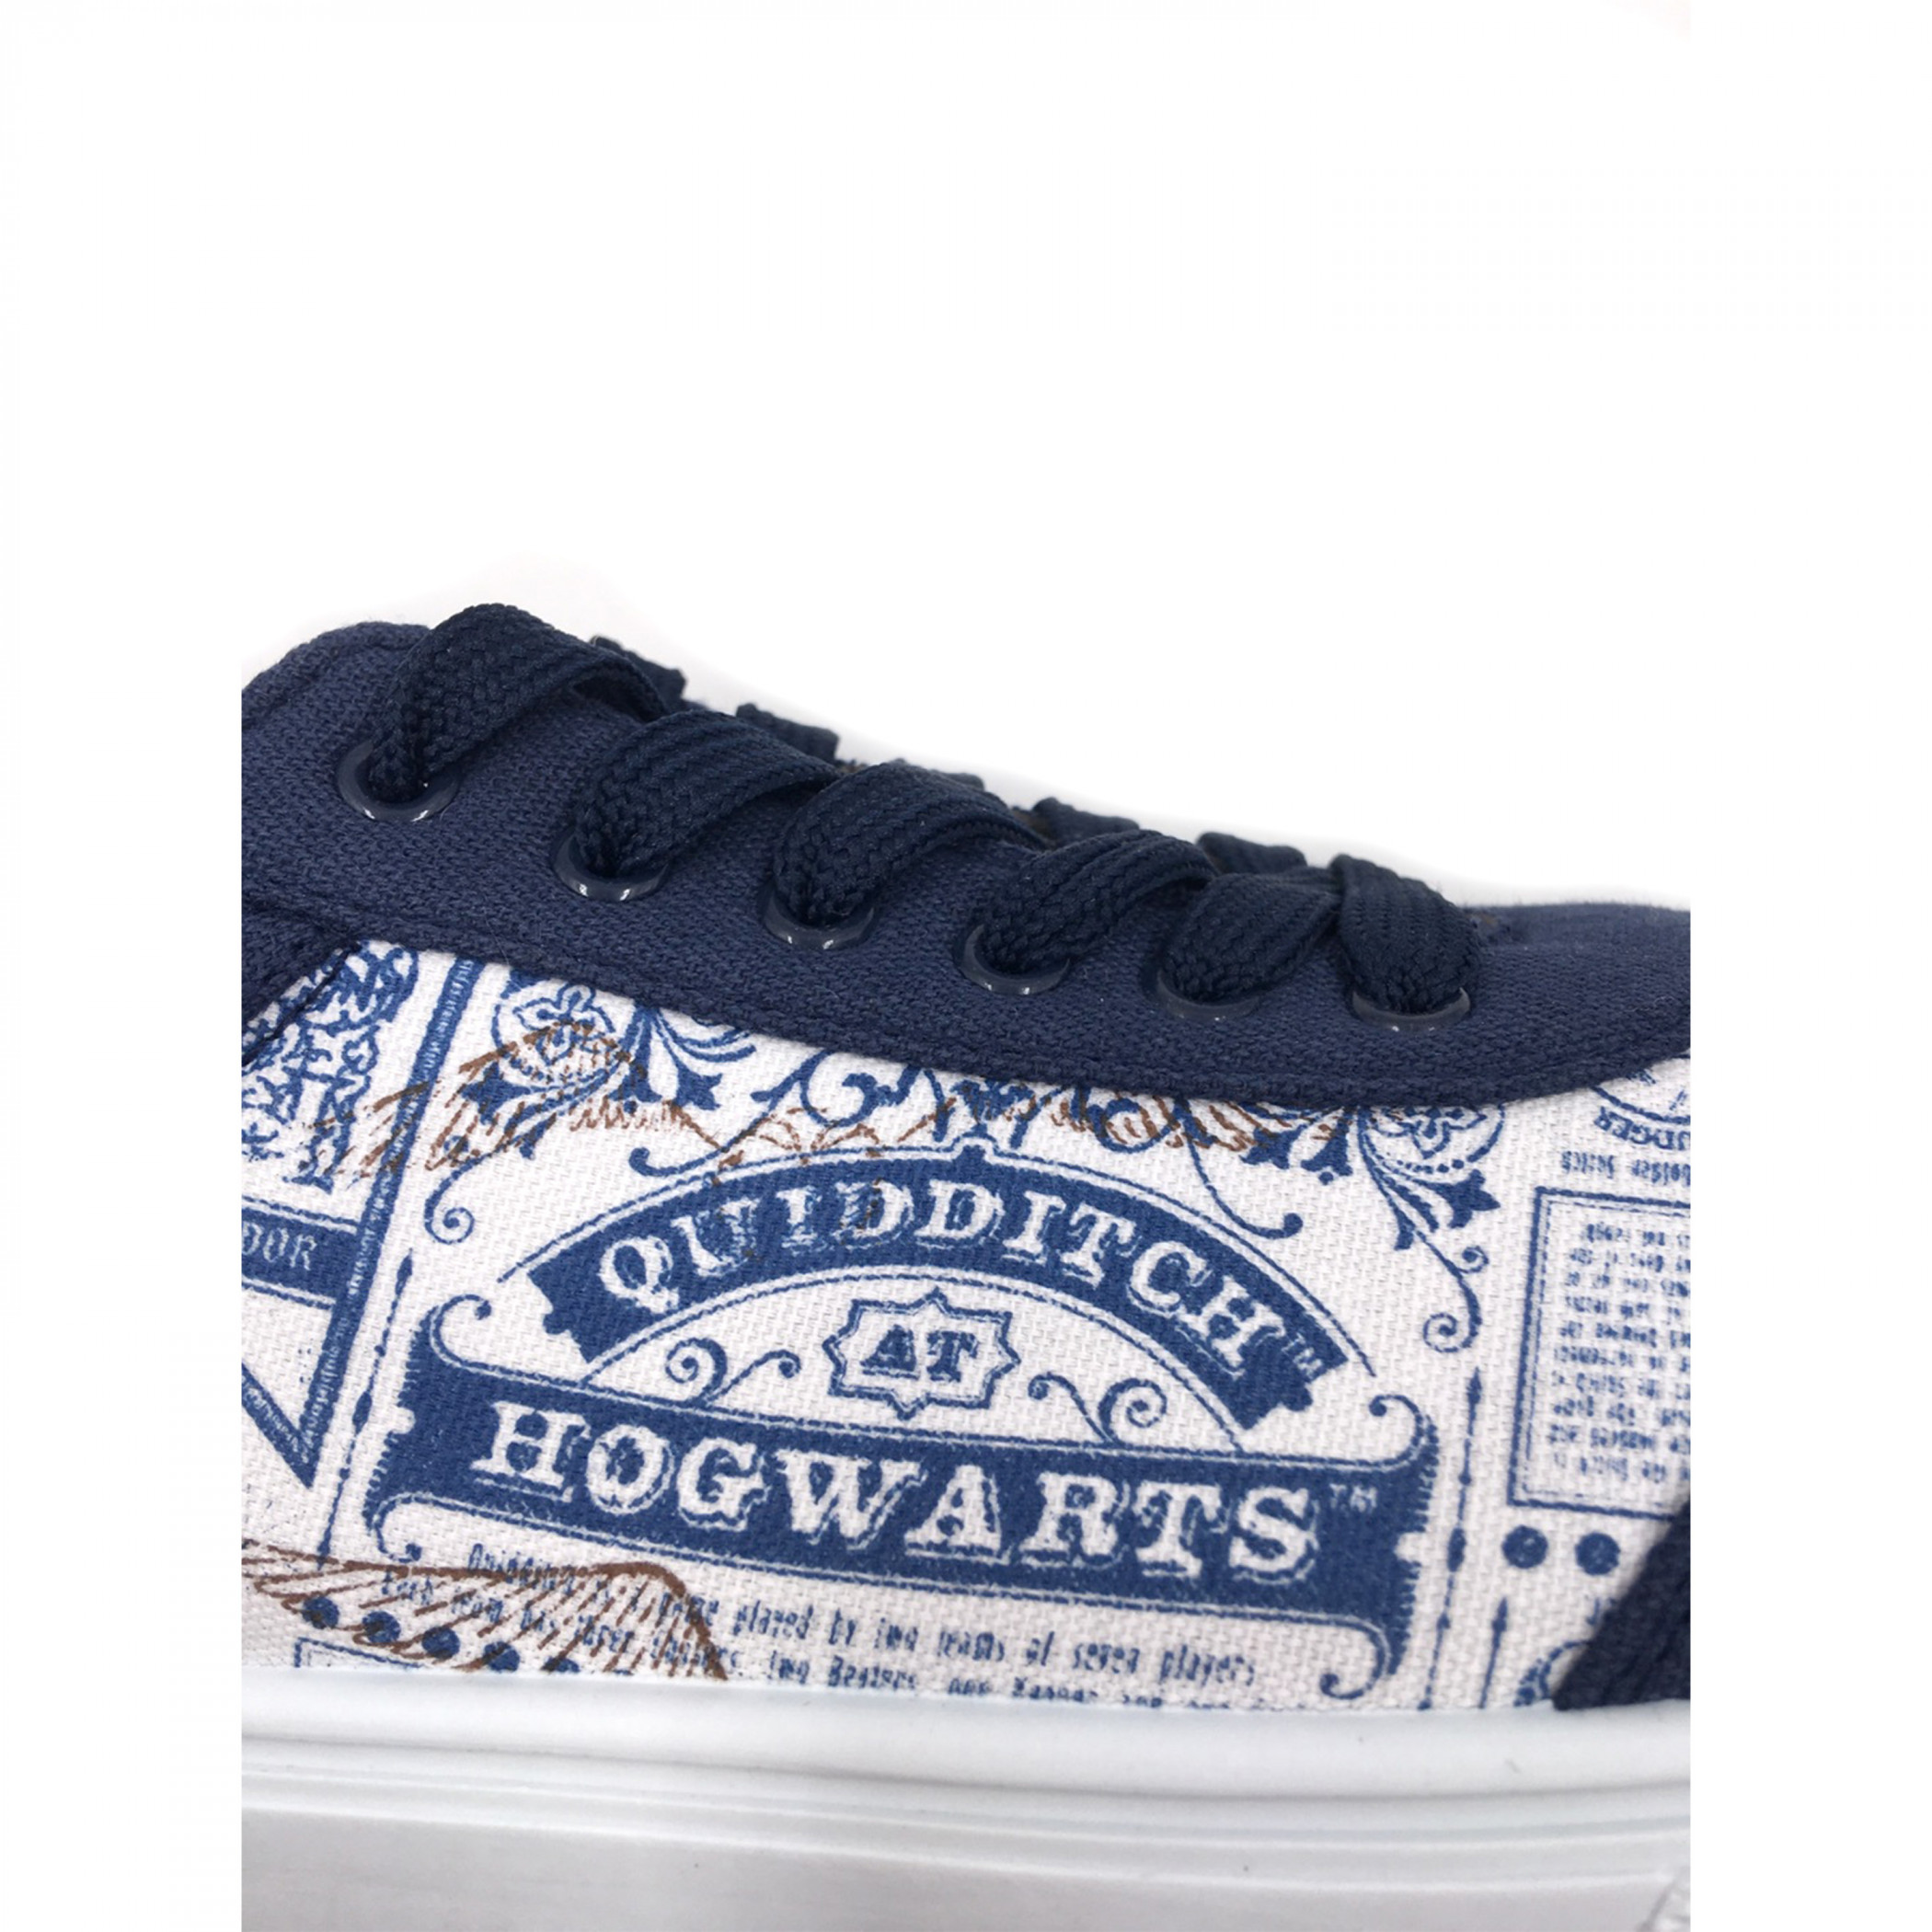 Harry Potter Quidditch at Hogwarts Men's Low Top Sneakers